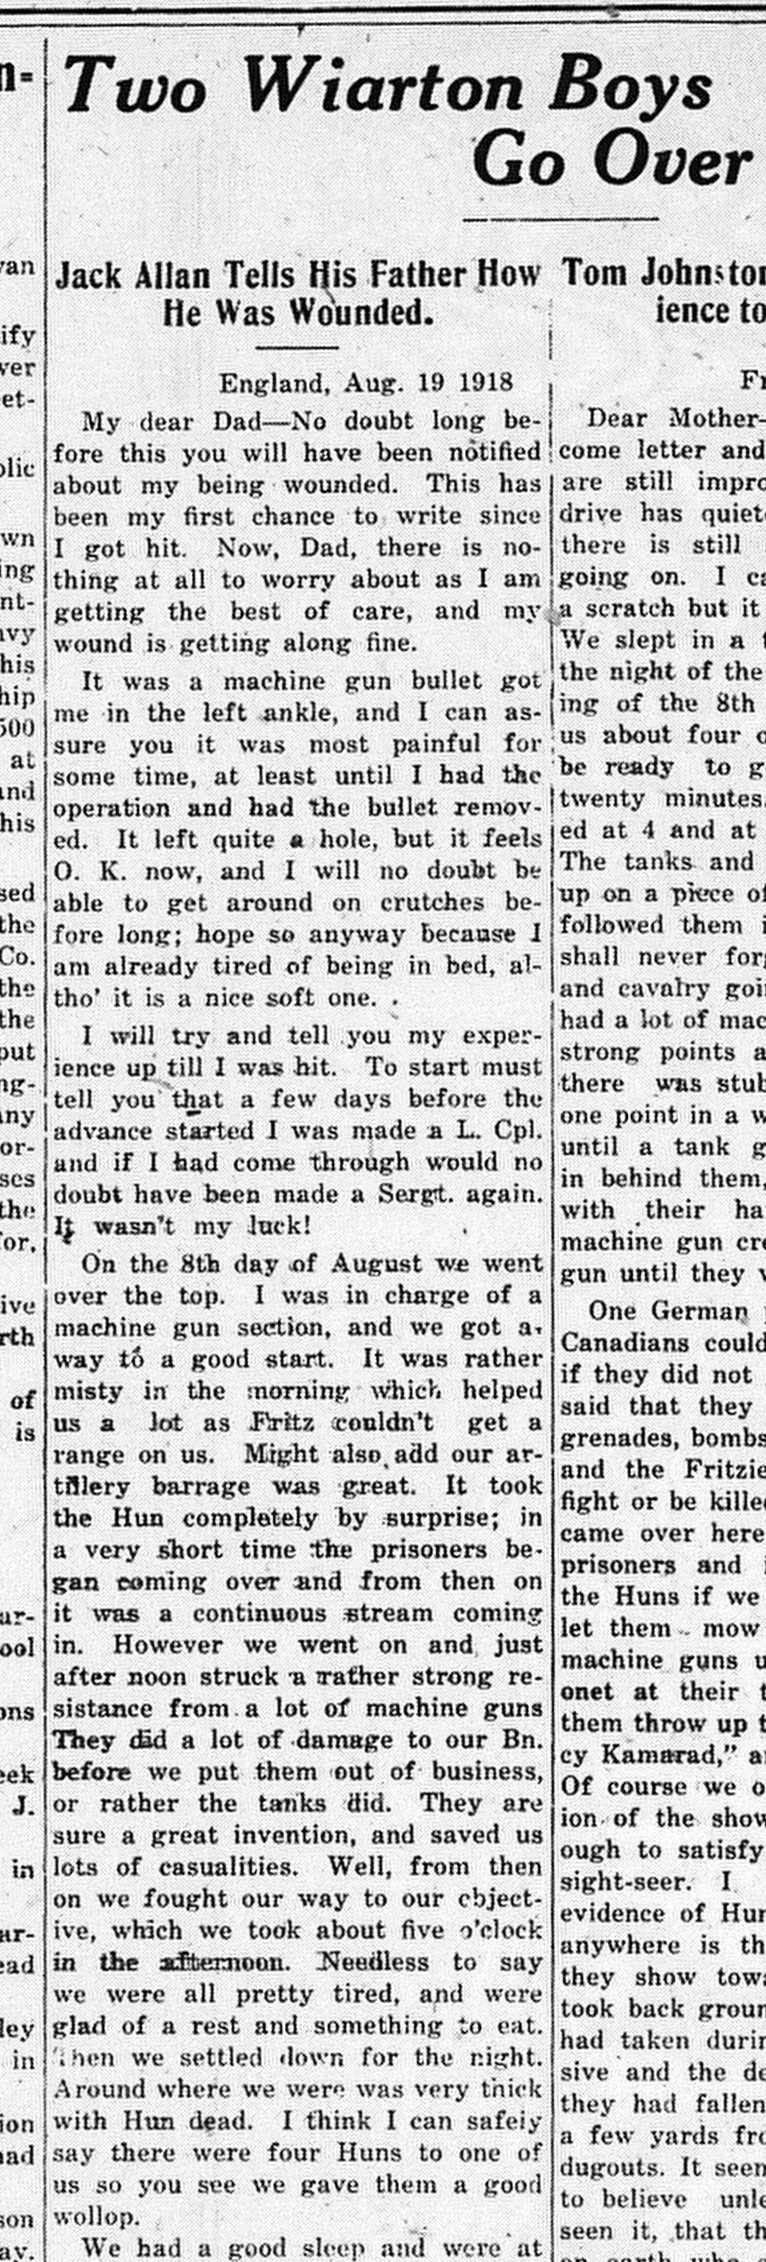 Canadian Echo, September 11, 1918 (part 1 of 2)